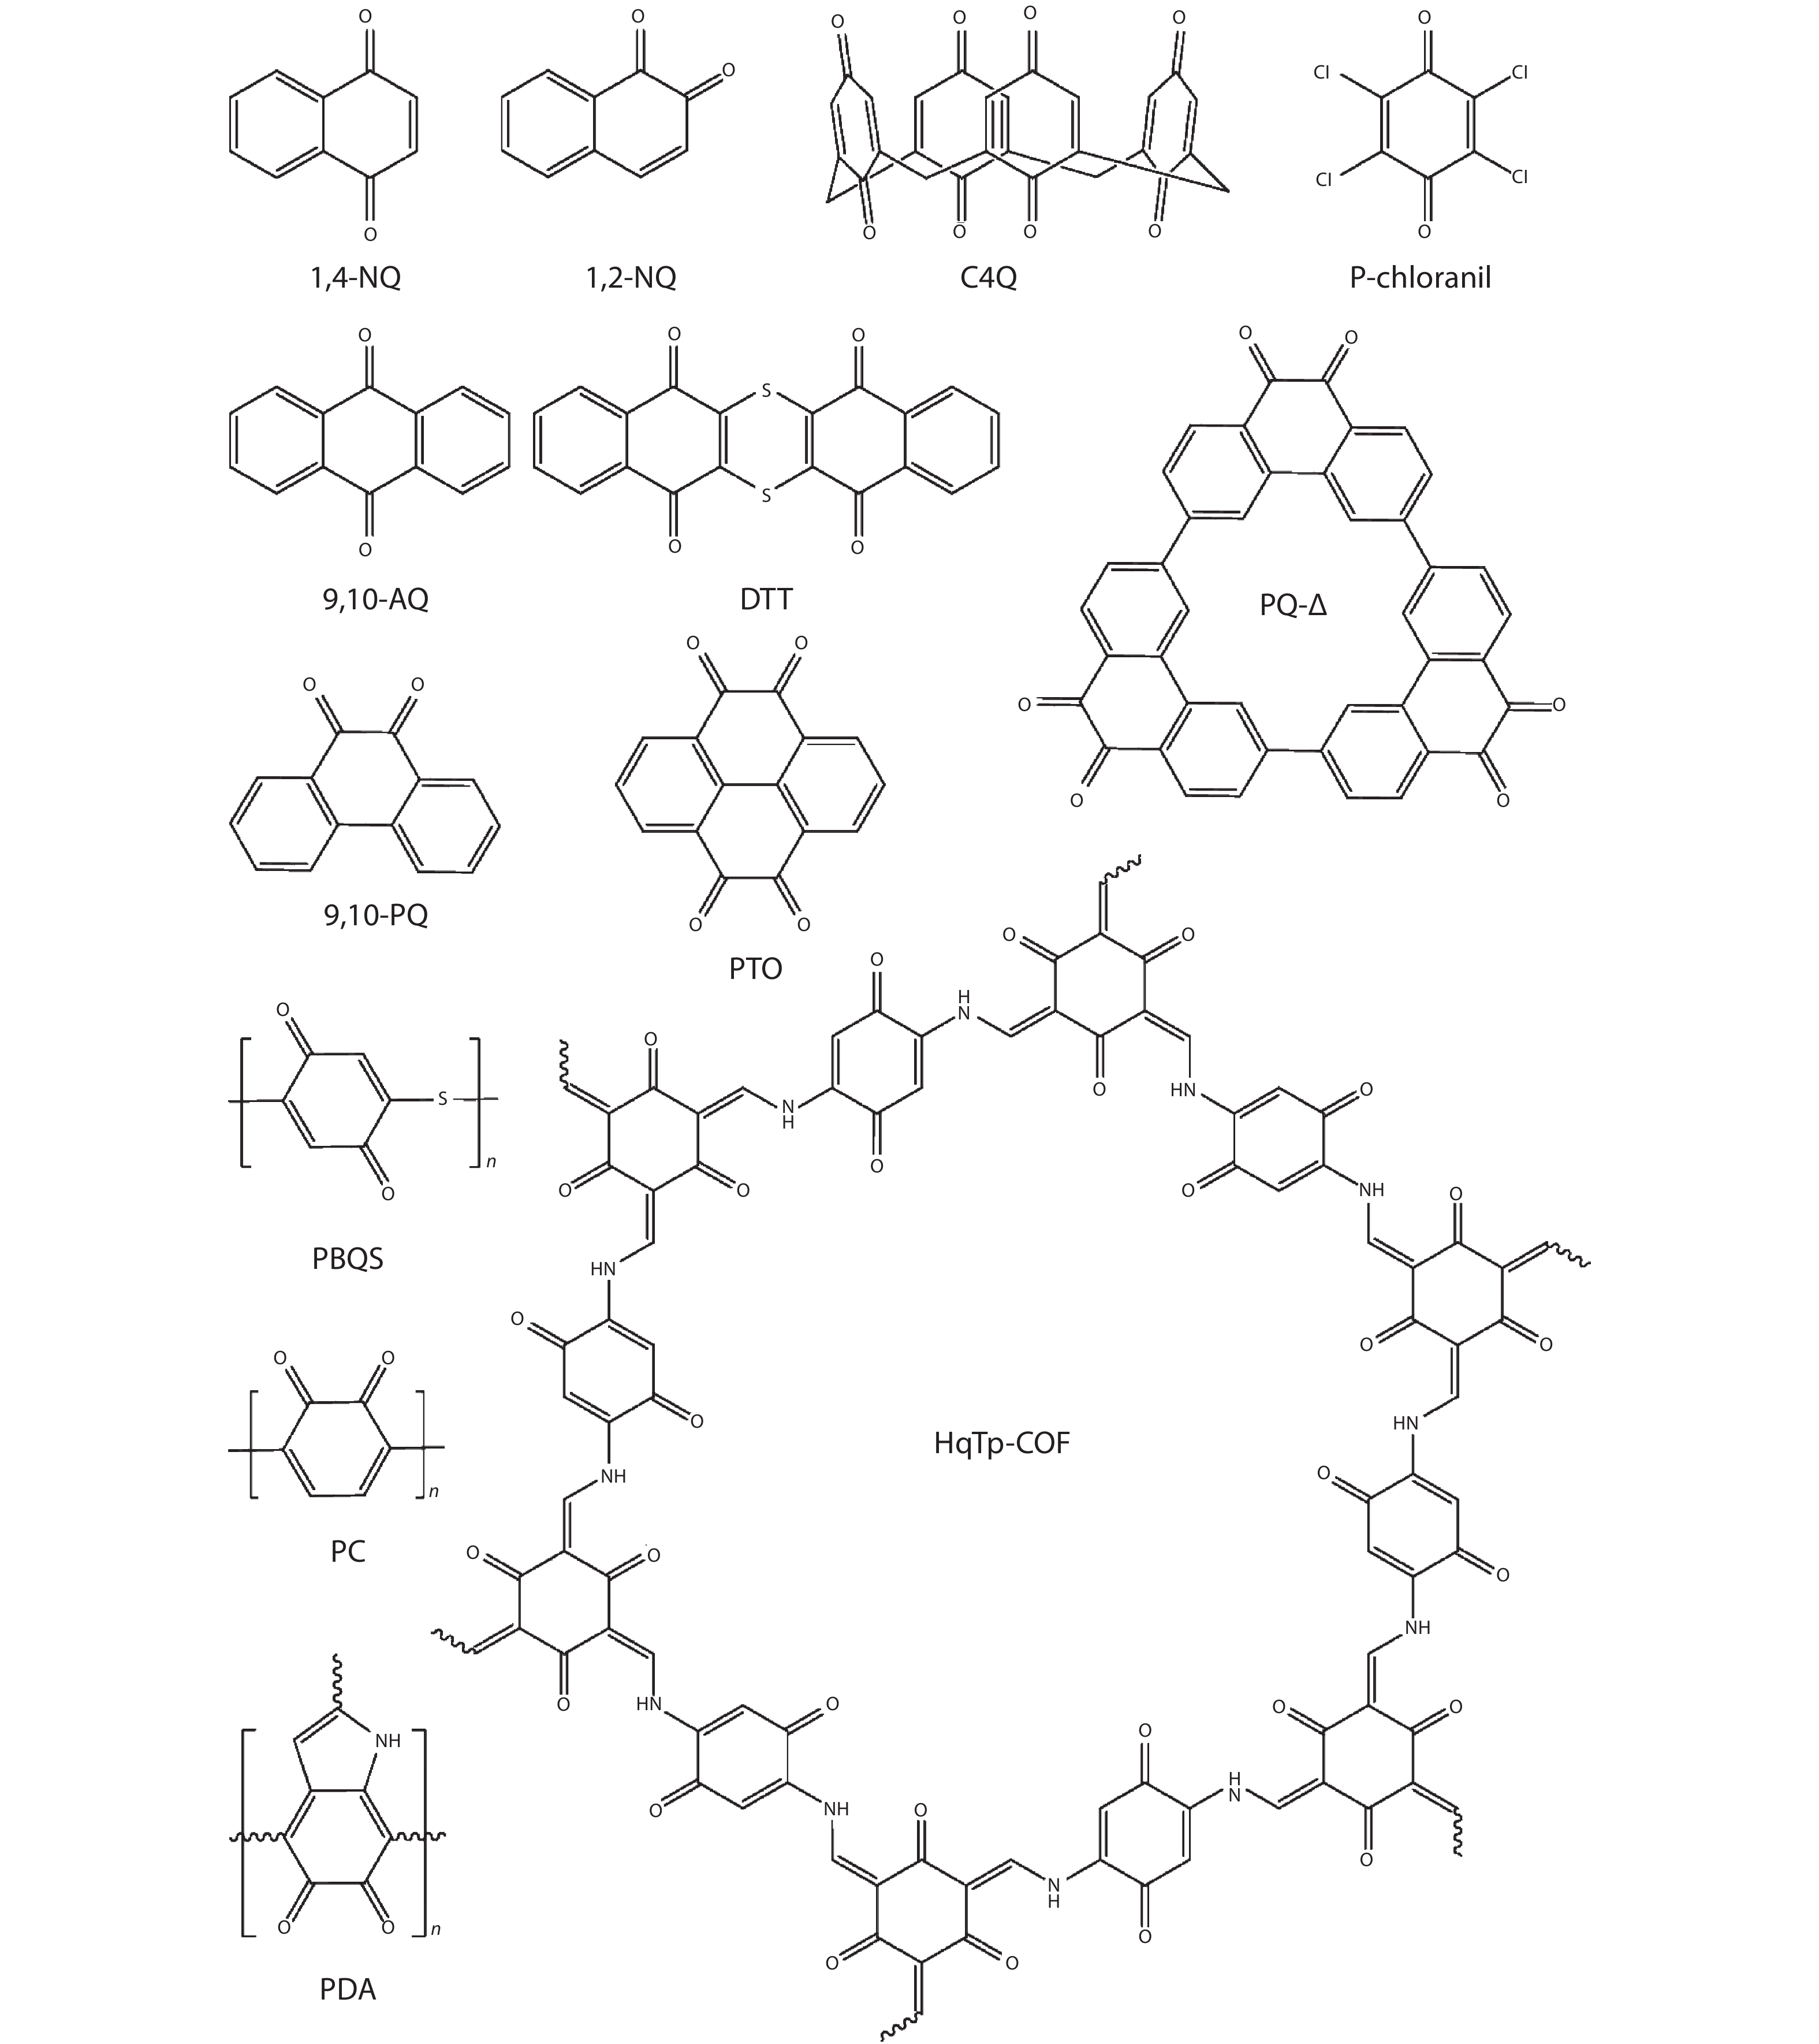 The molecular structures of reported quinones as cathodes for ZIBs.